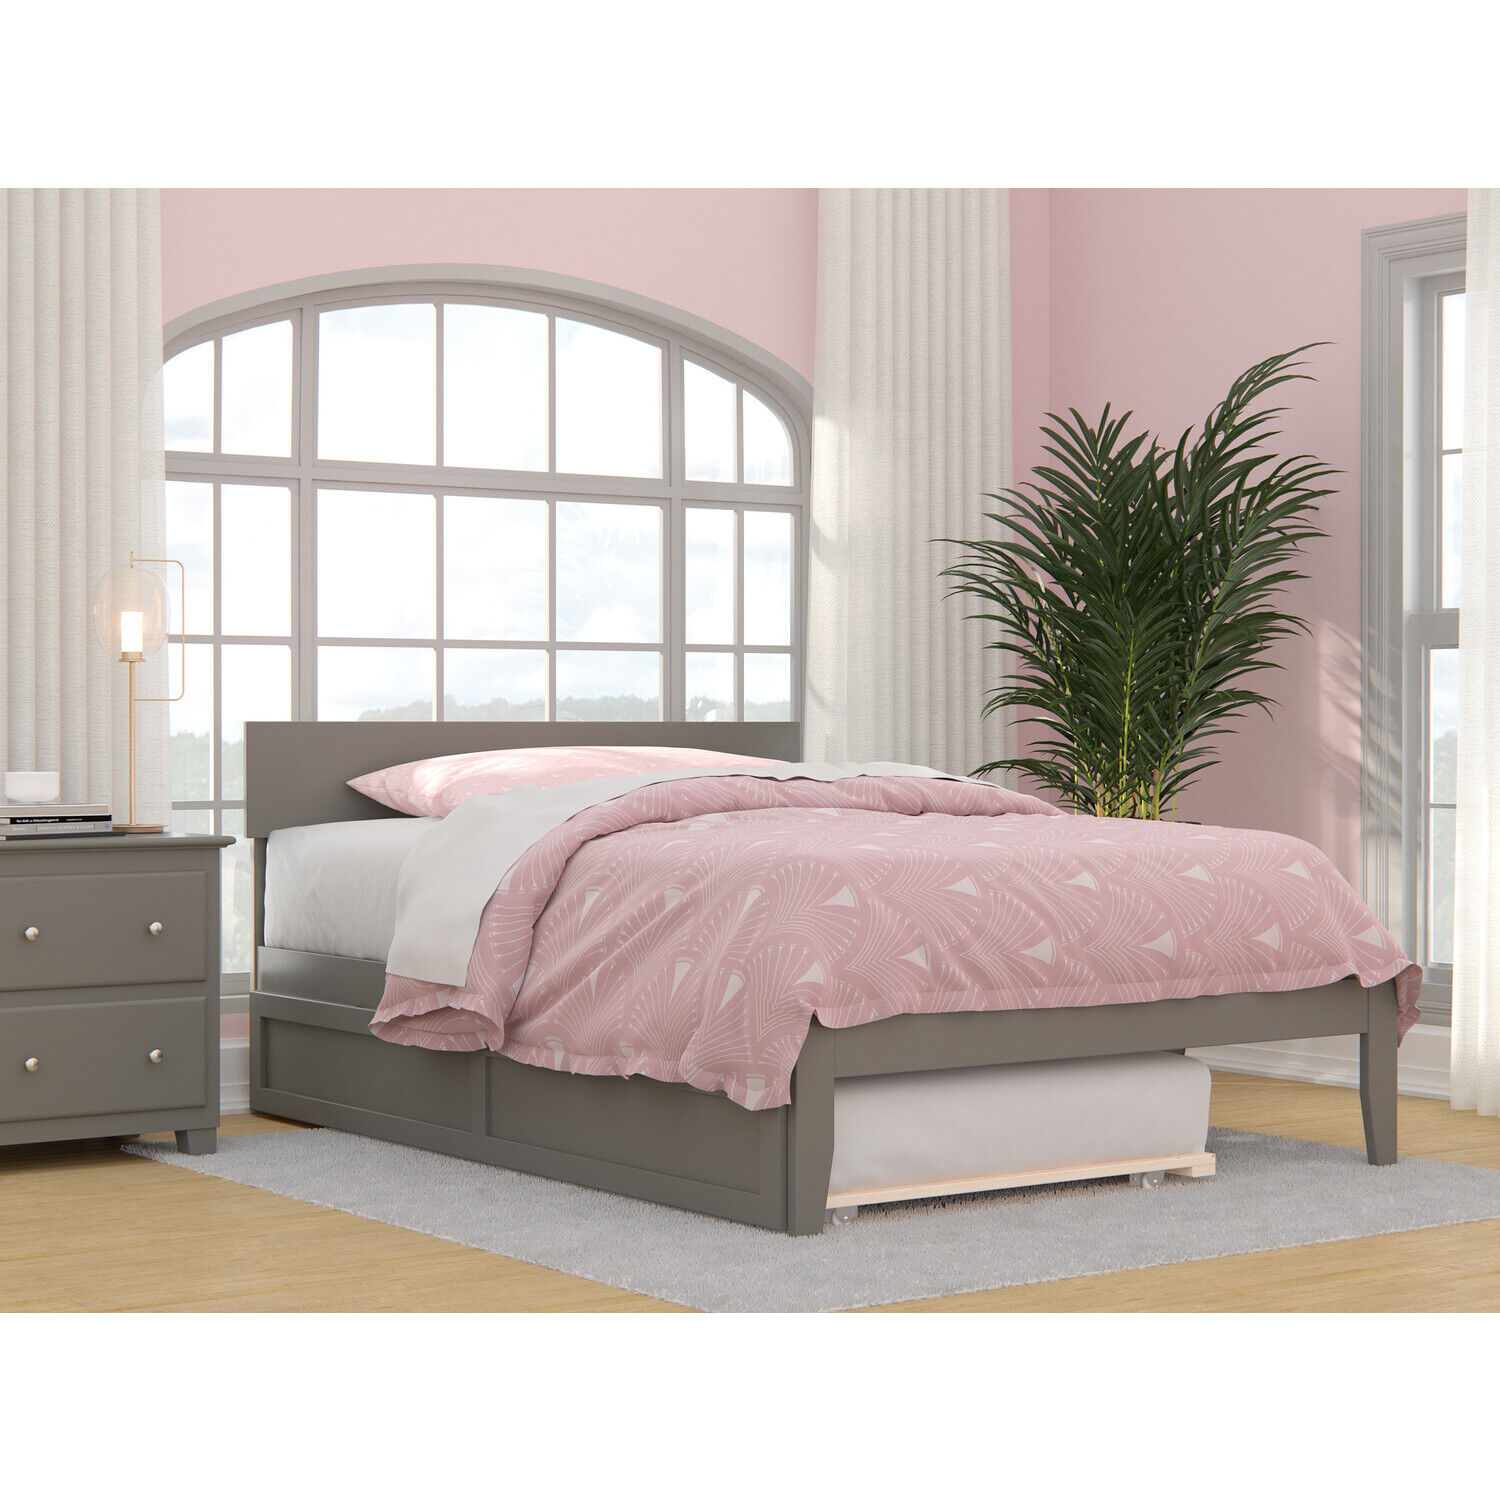 Atlantic Furniture Boston Full Bed With Twin Trundle In Grey